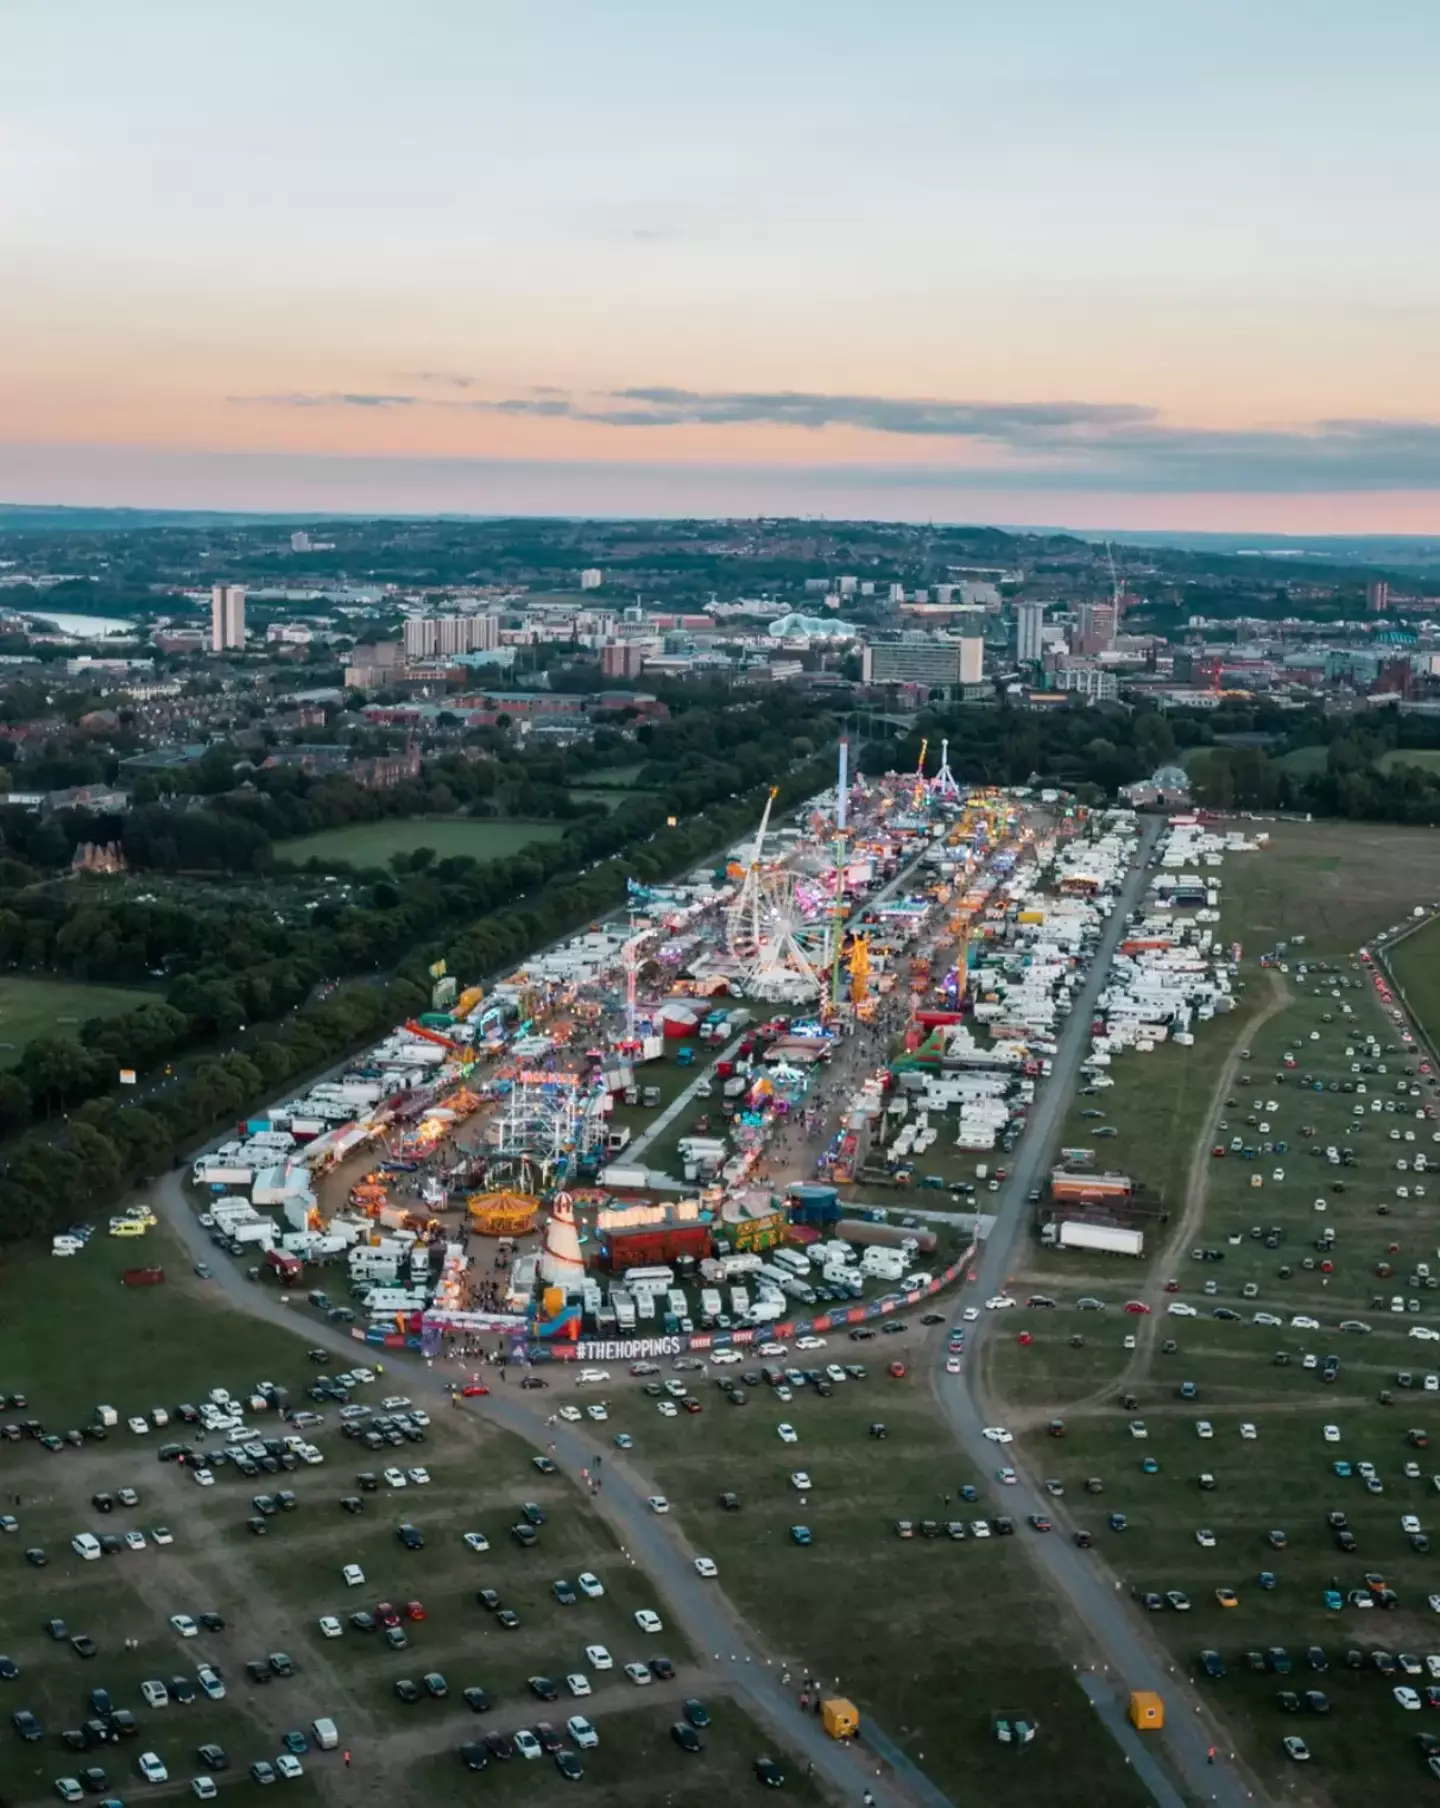 An extra date has been added to 'Europe's largest funfair'.